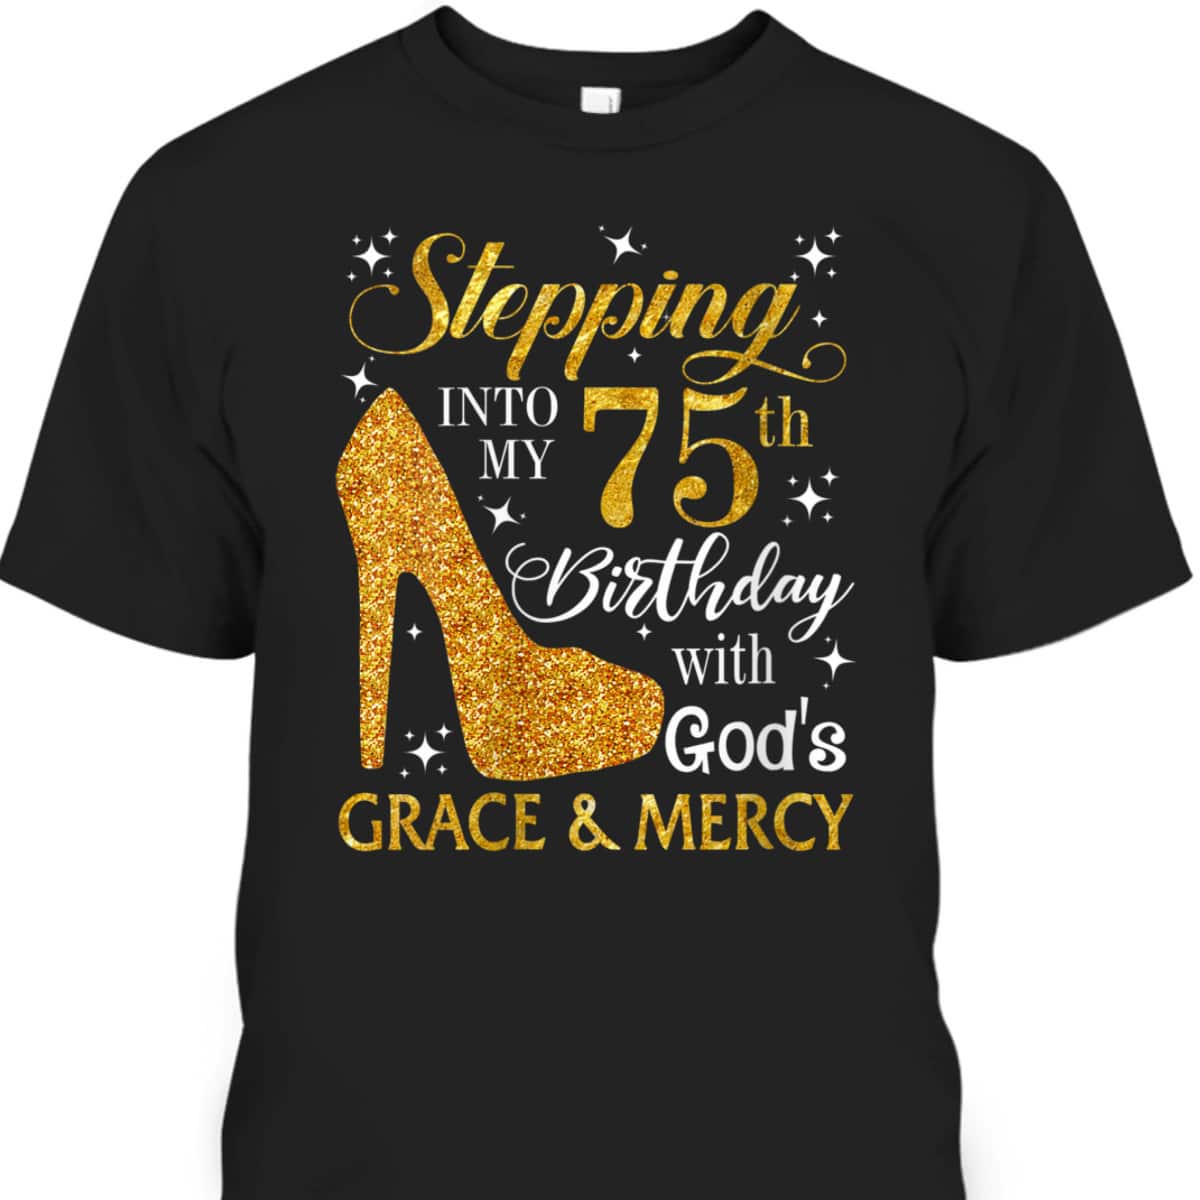 Stepping Into My 75th Birthday With God's Grace & Mercy Religious Christian T-Shirt